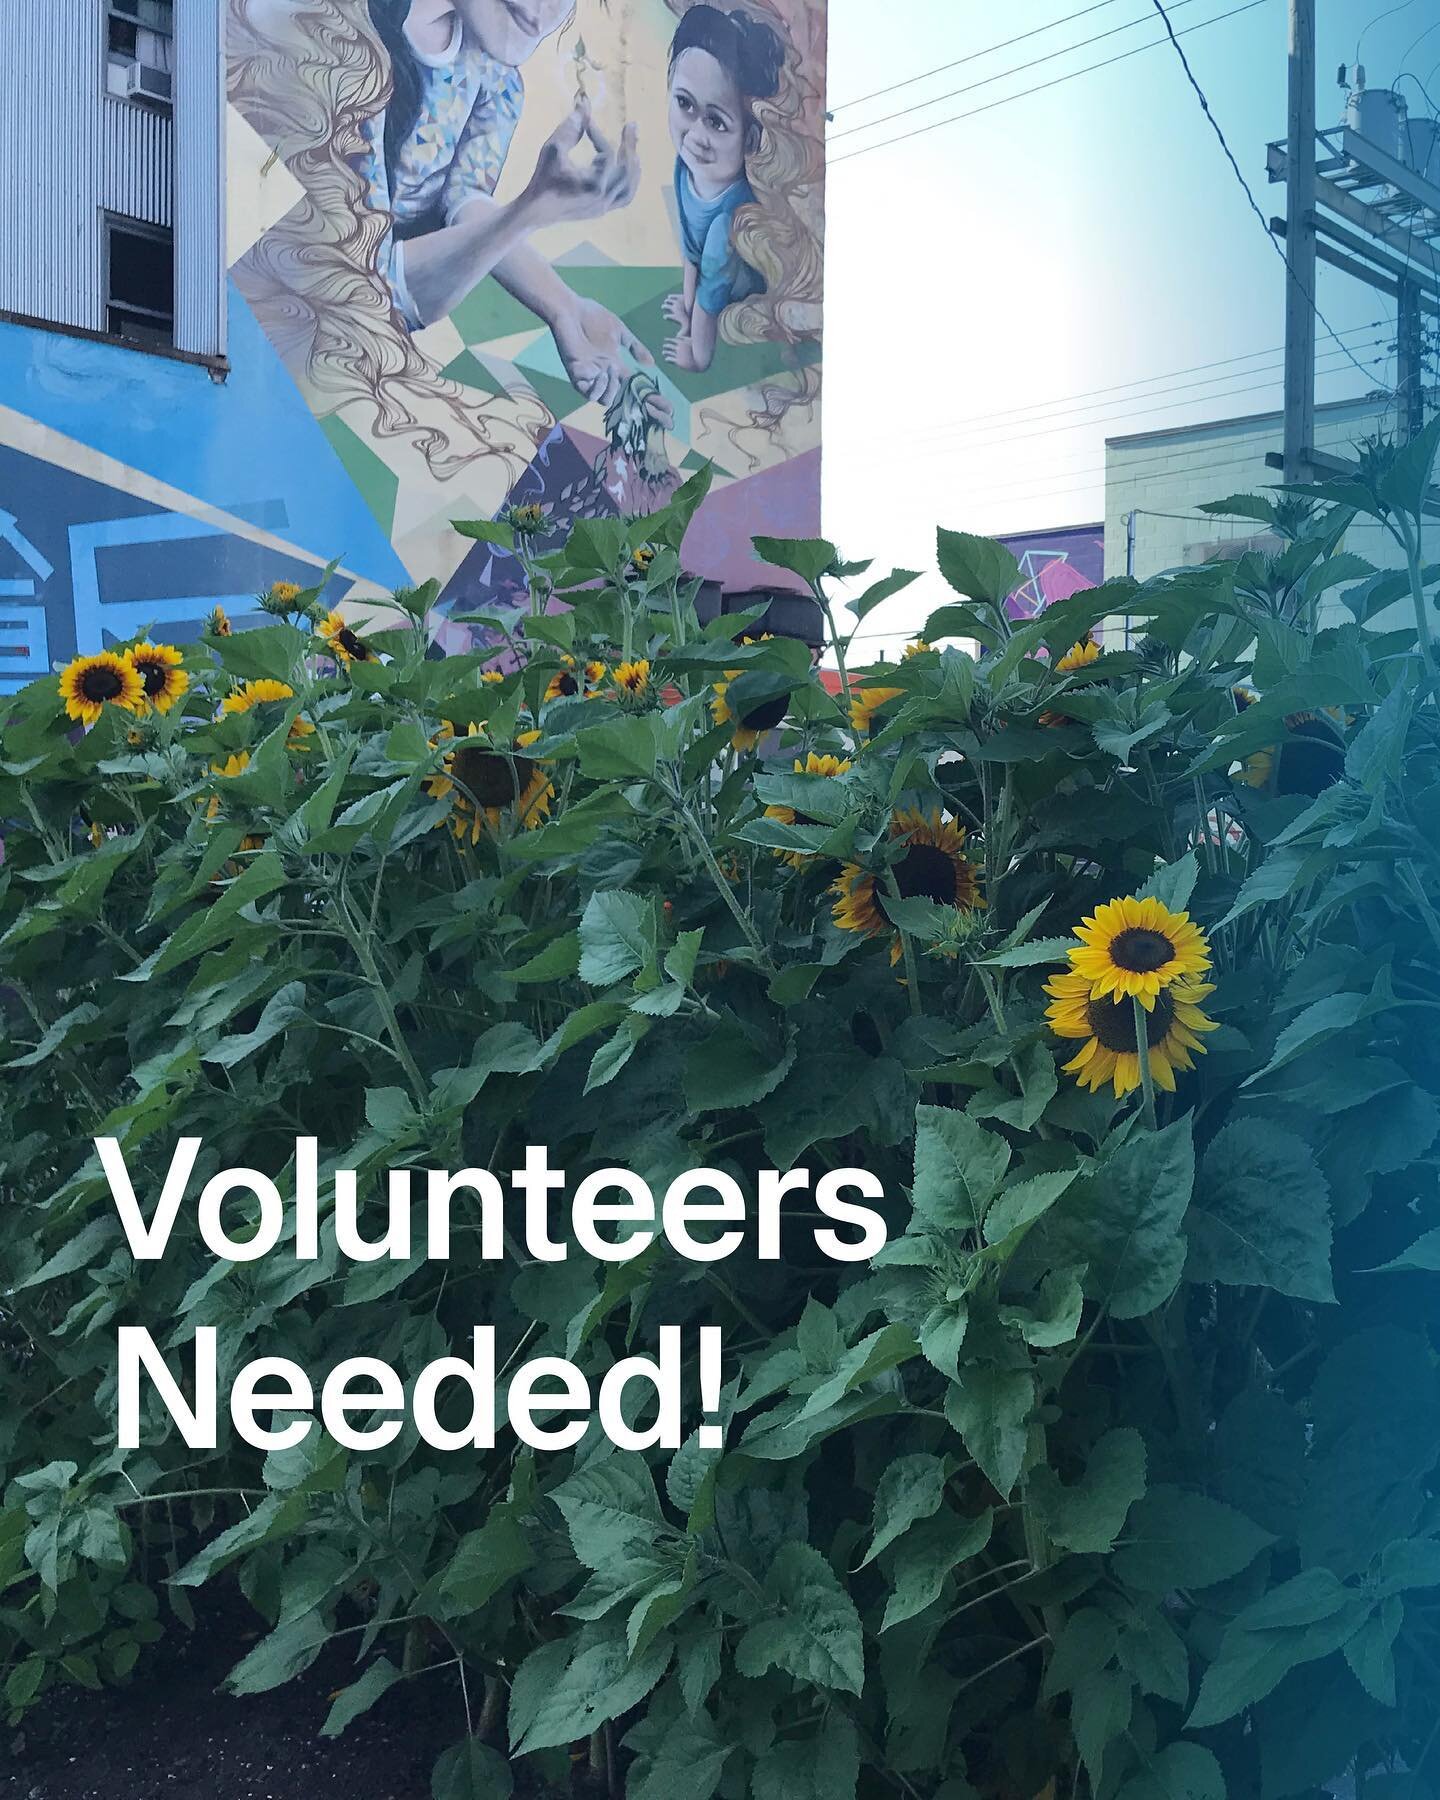 We&rsquo;re looking for volunteers to help with a fundraiser for the Urban Farm! The positions are: On Call Drivers (July 25-31) and Special Project Farm Volunteer (July 28 afternoon). For info on these volunteer opportunities and more, visit dtesnho